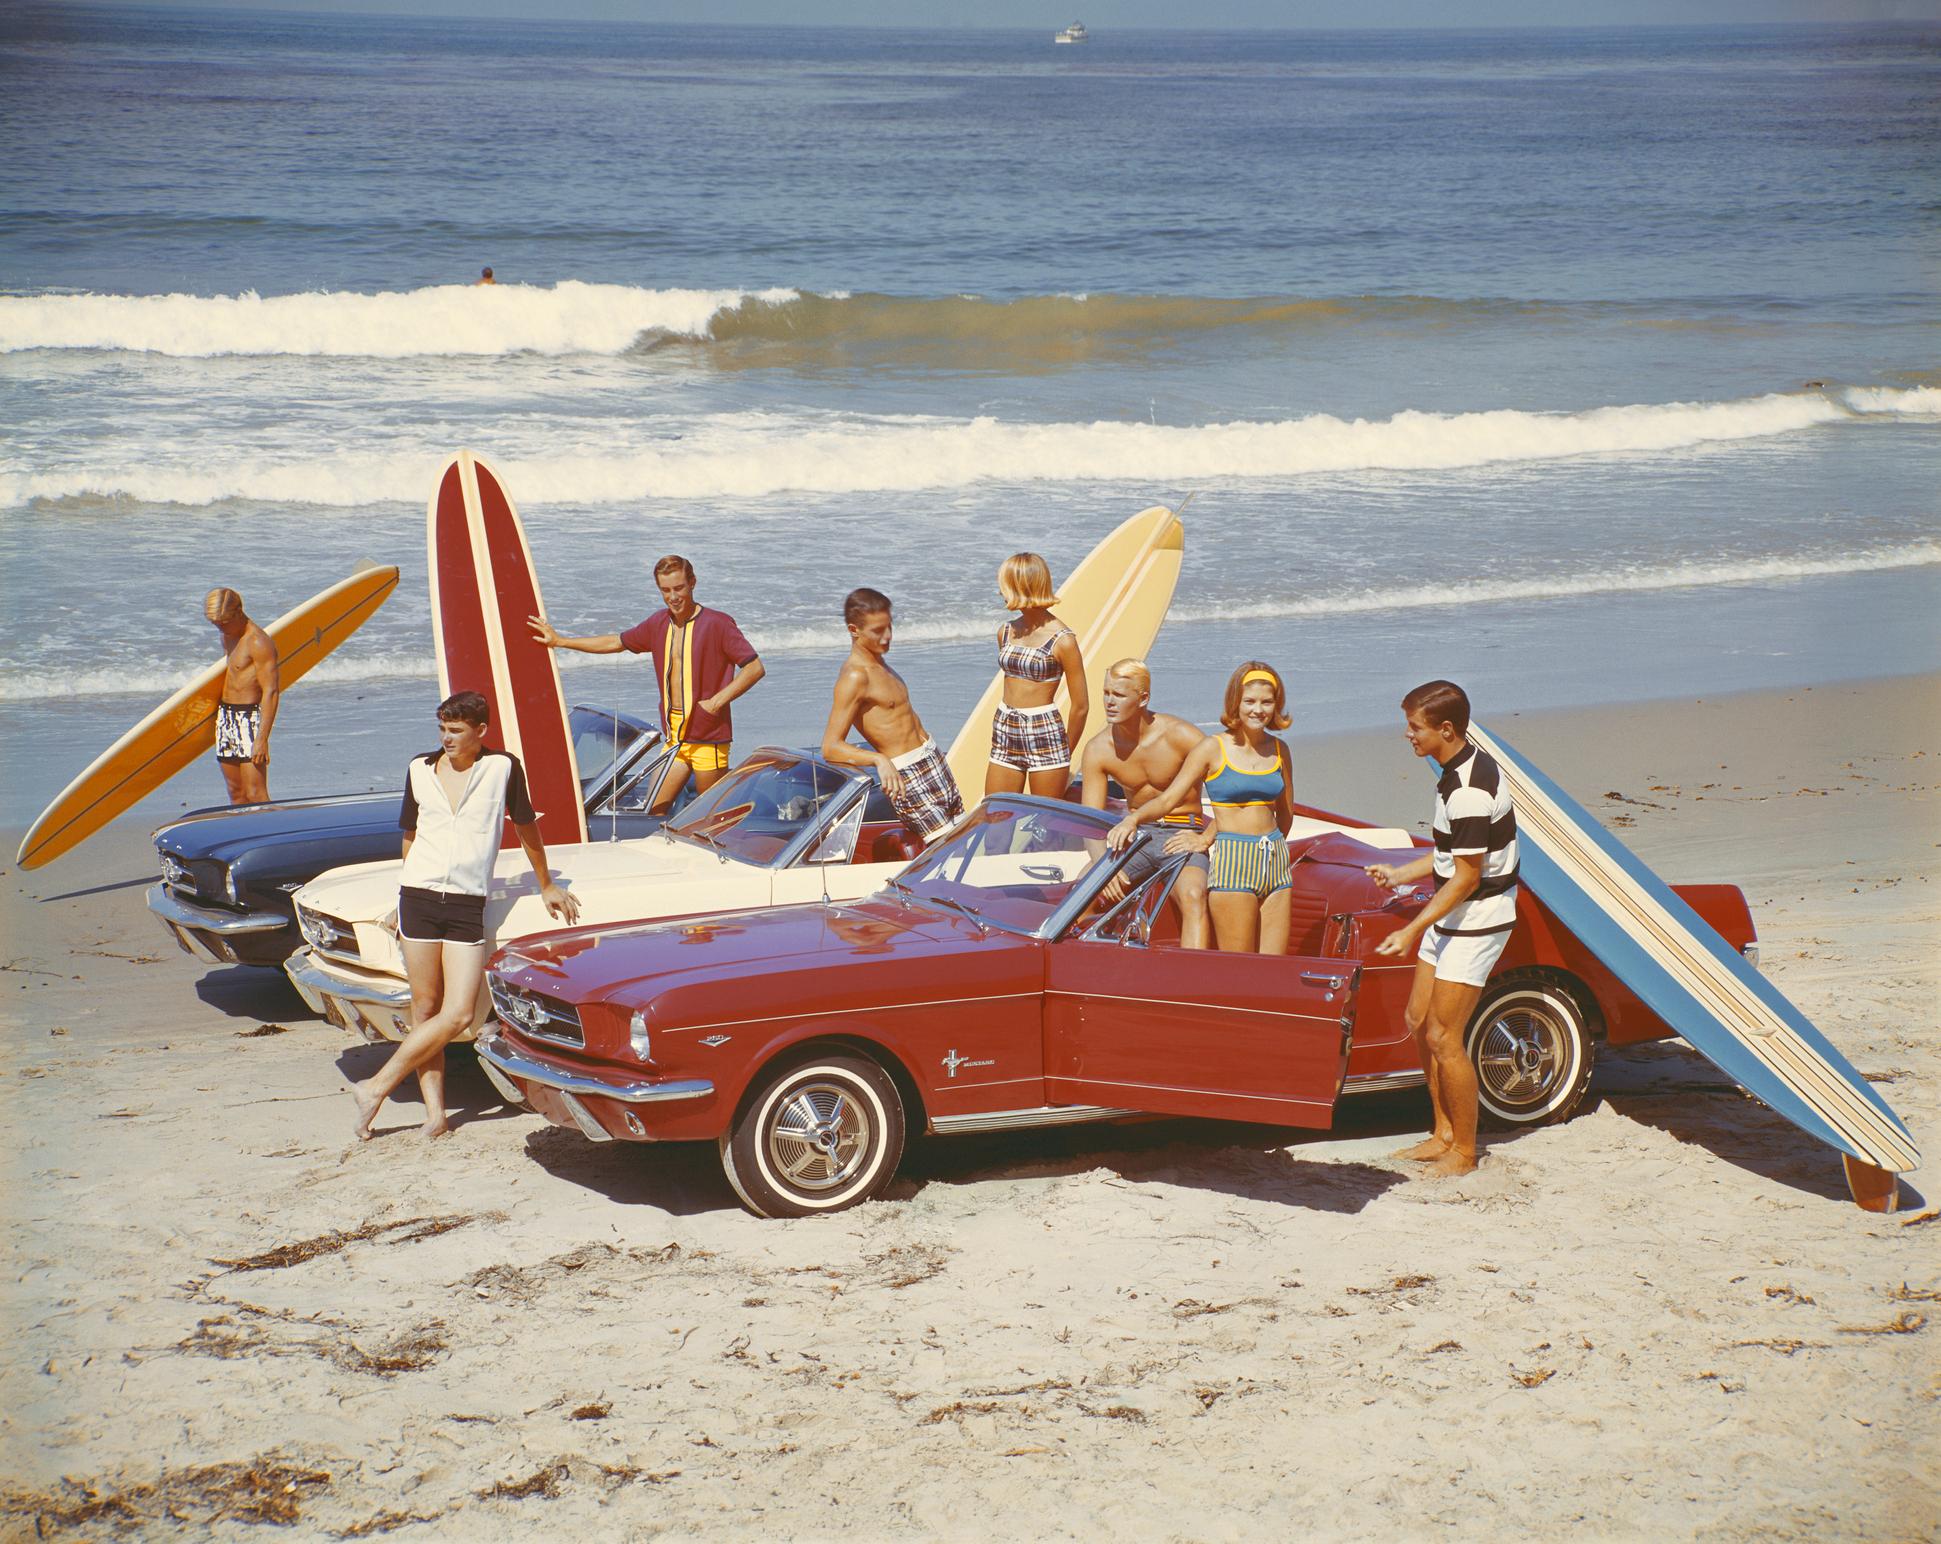 Tom Kelley Figurative Photograph – Freunde mit Surfbrettern in Ford Mustangs